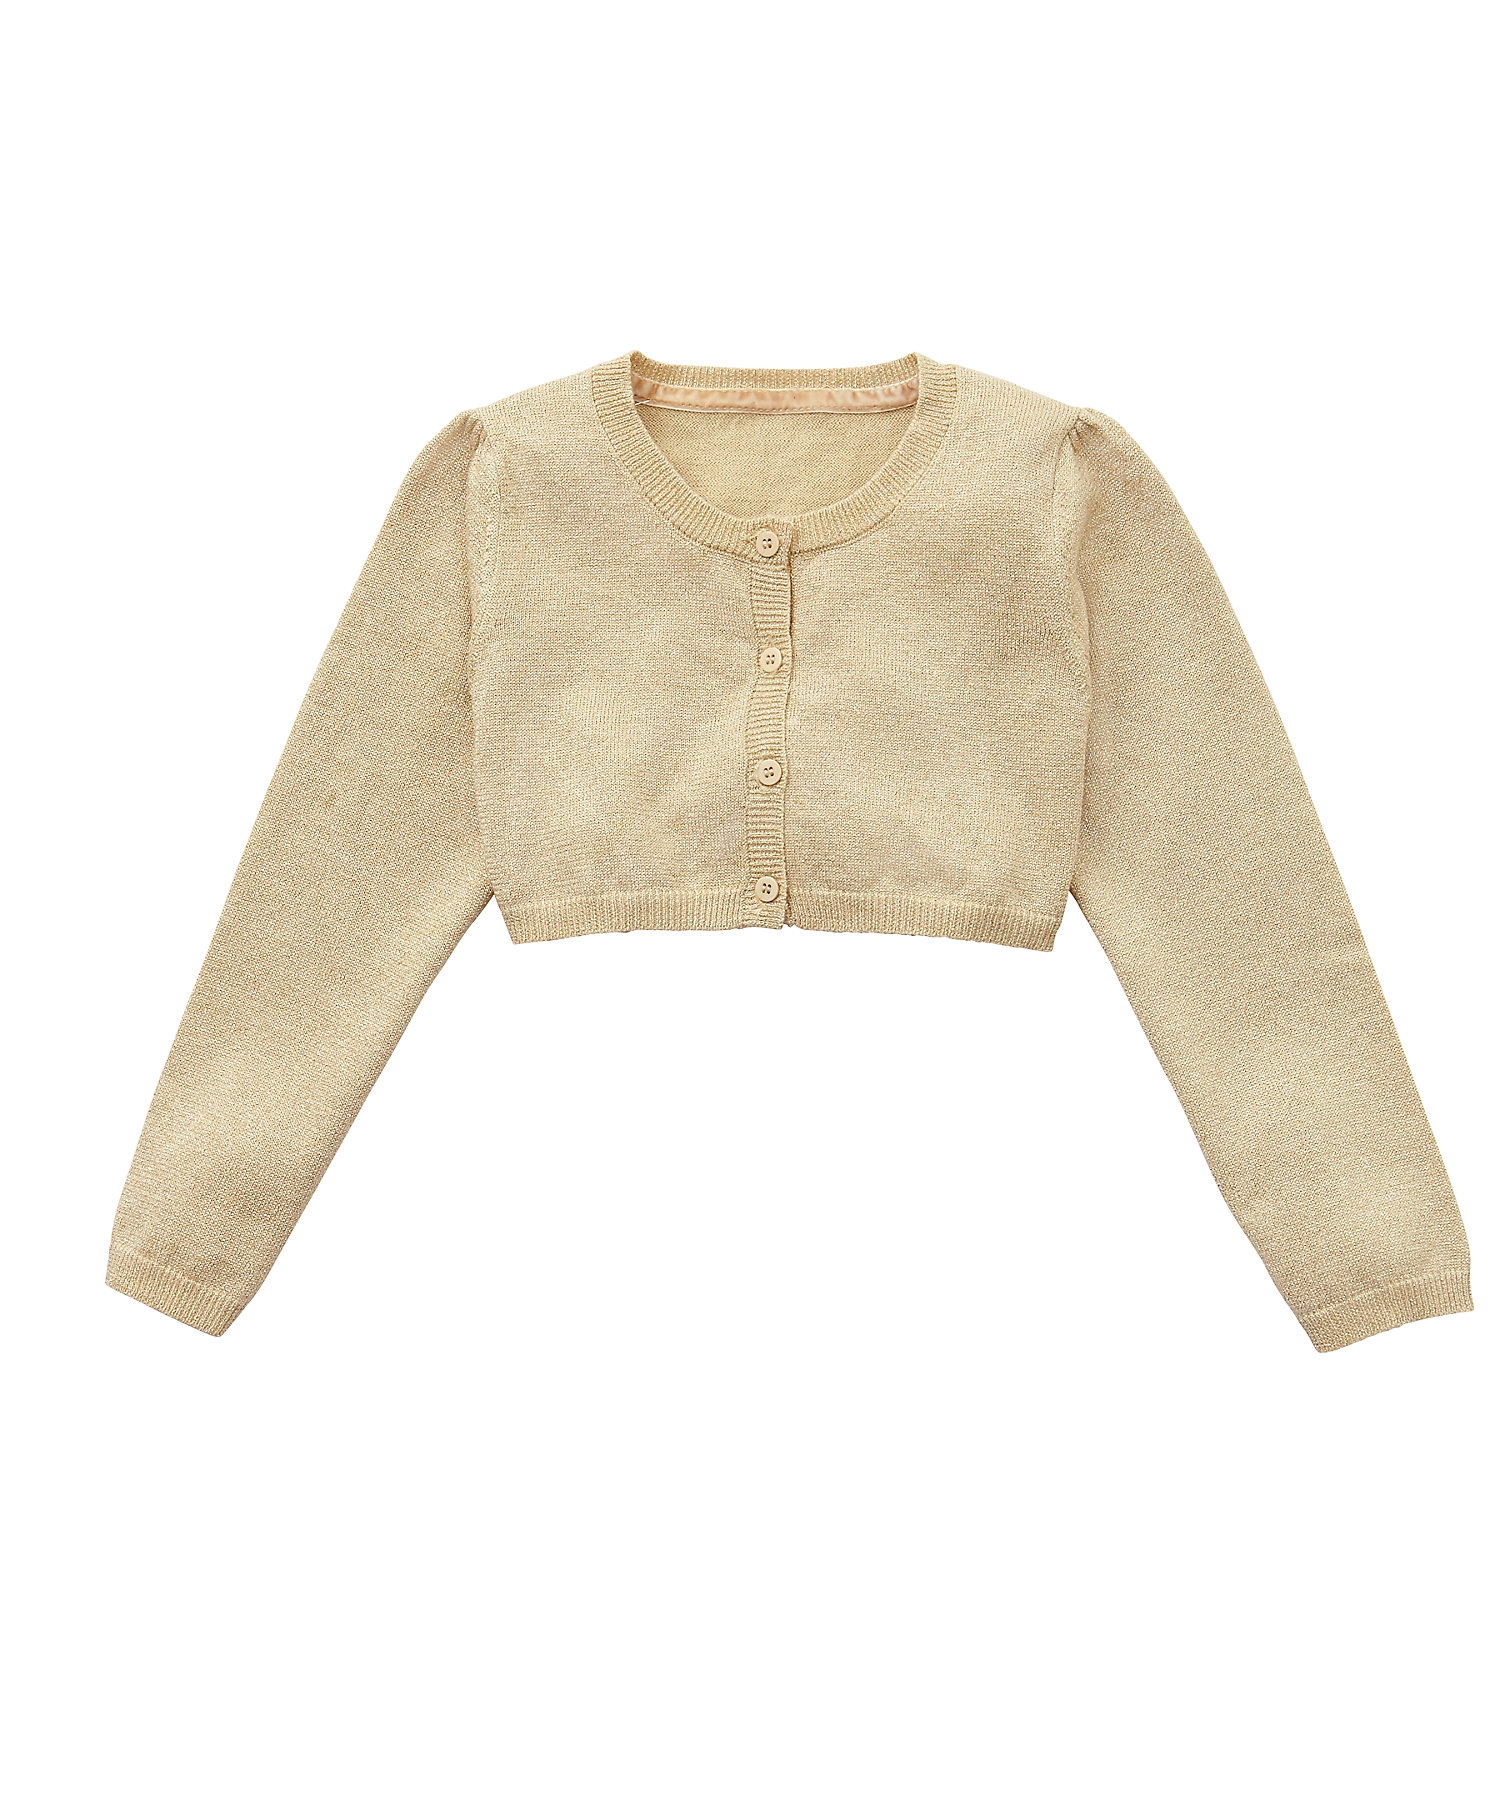 Mothercare | Girls Full Sleeves Sweater -Gold